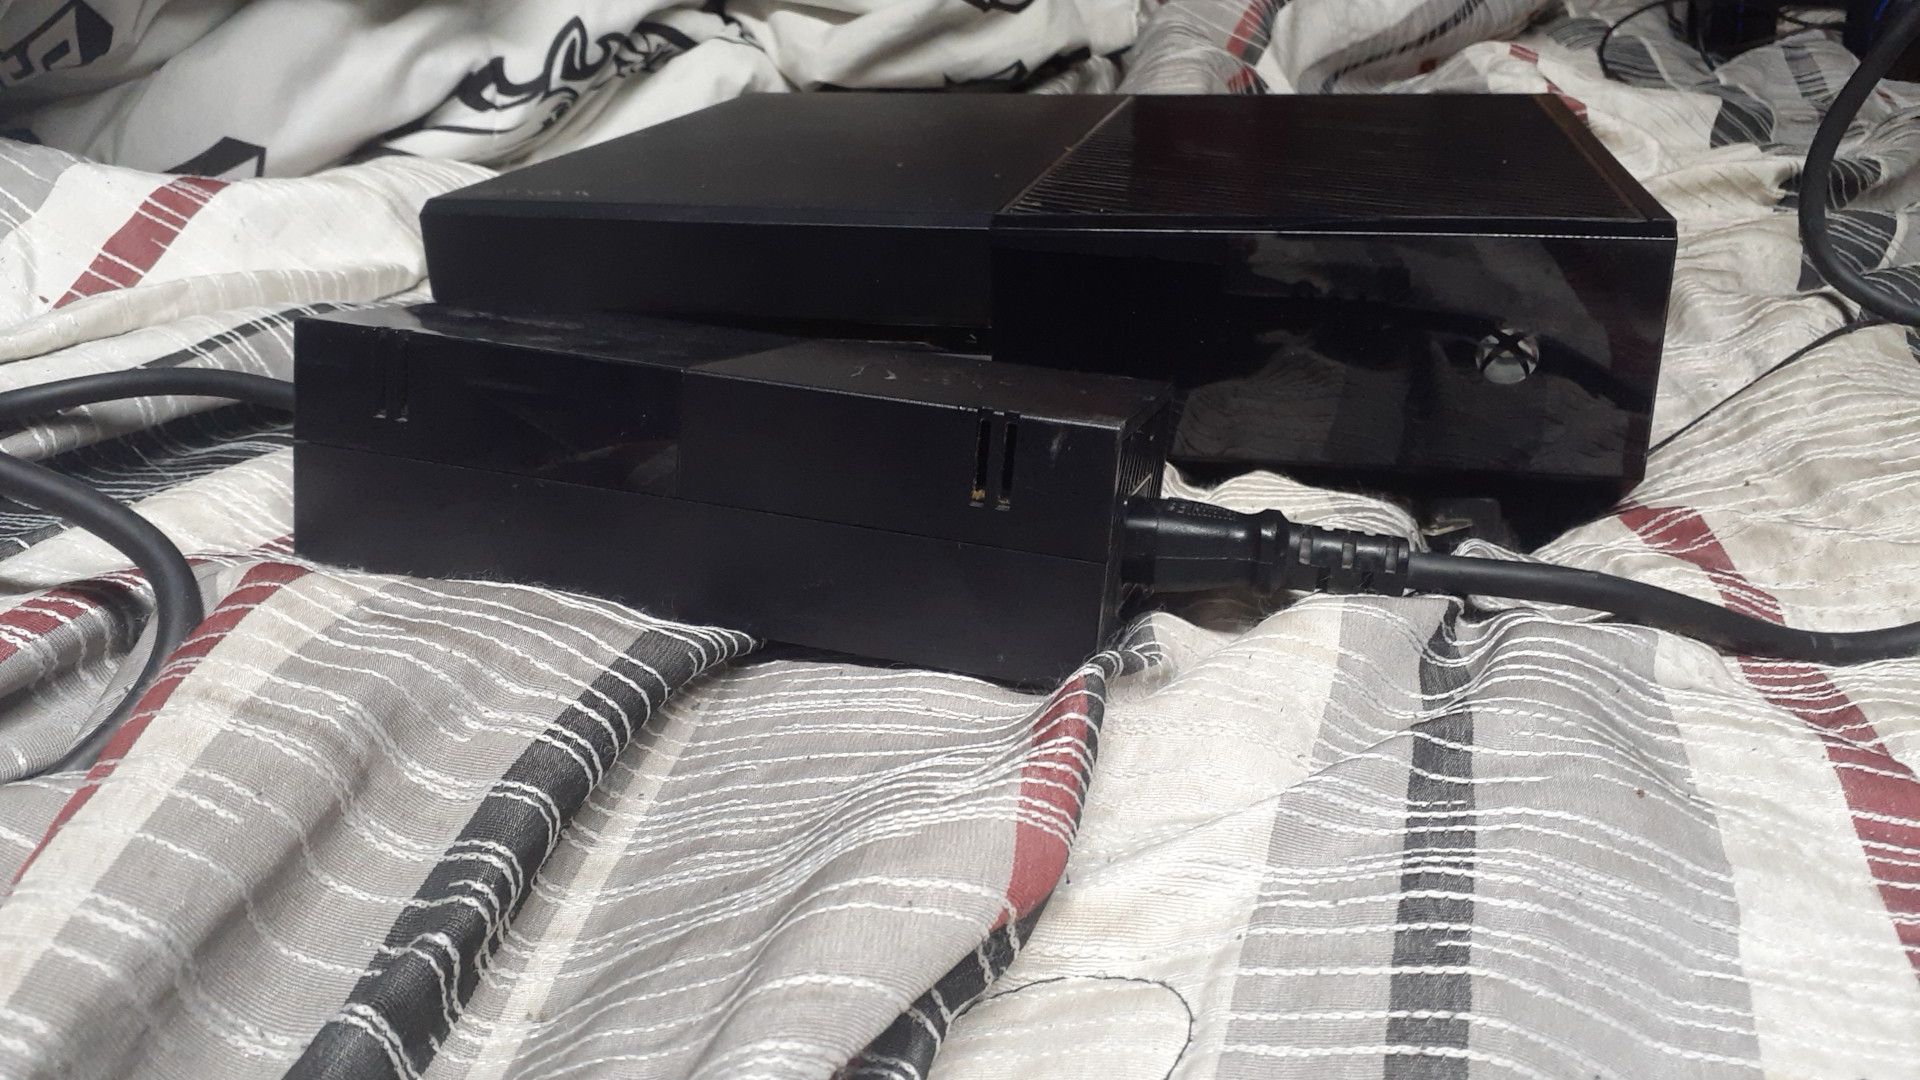 Xbox One with Power Cord $100 OBO